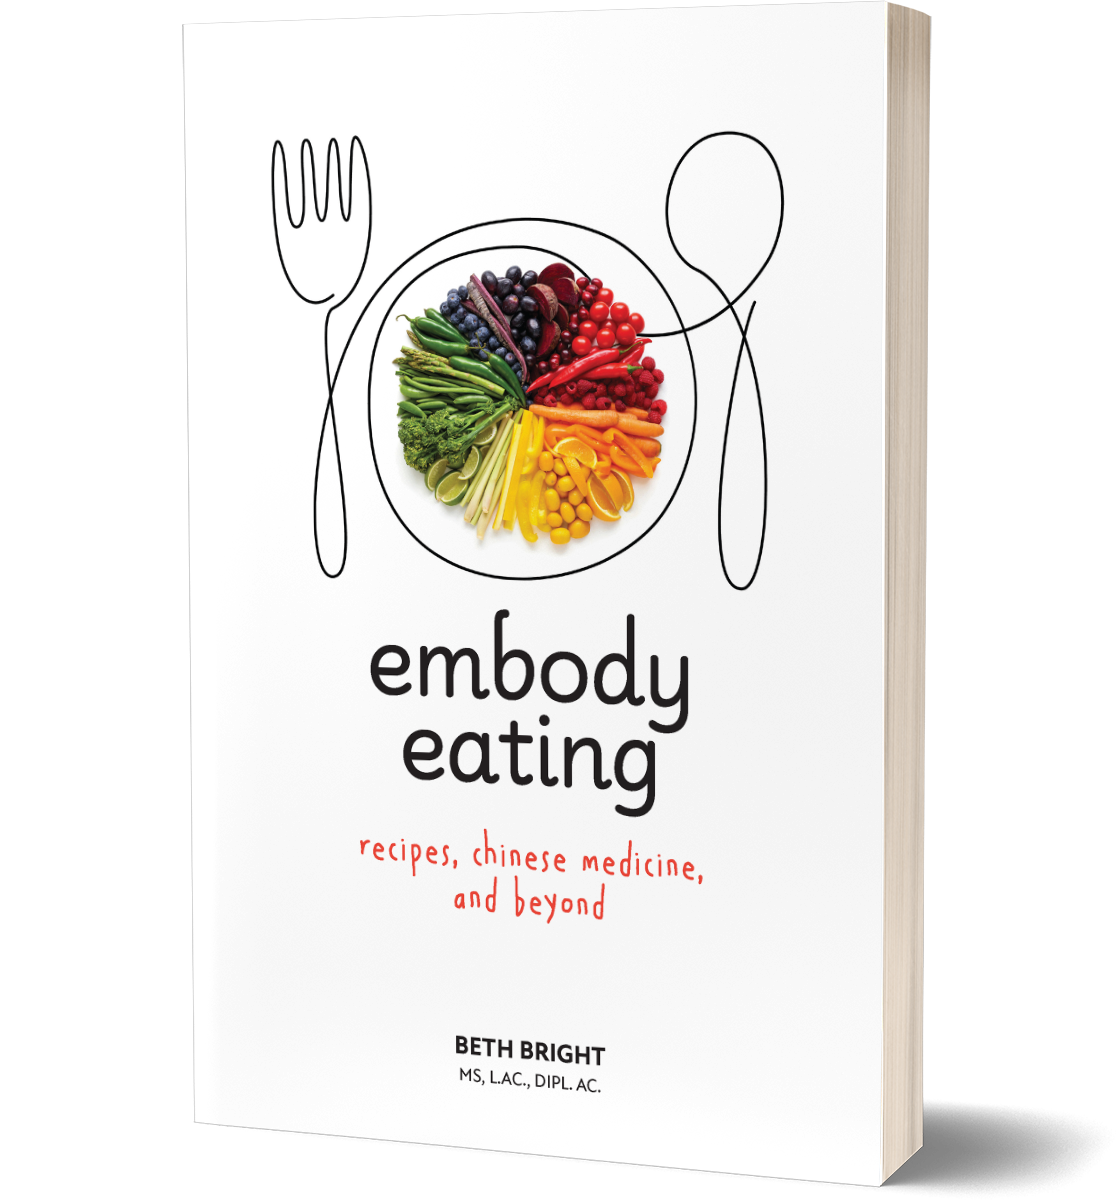 Embody Eating Recipes, Chinese Medicine, and Beyond